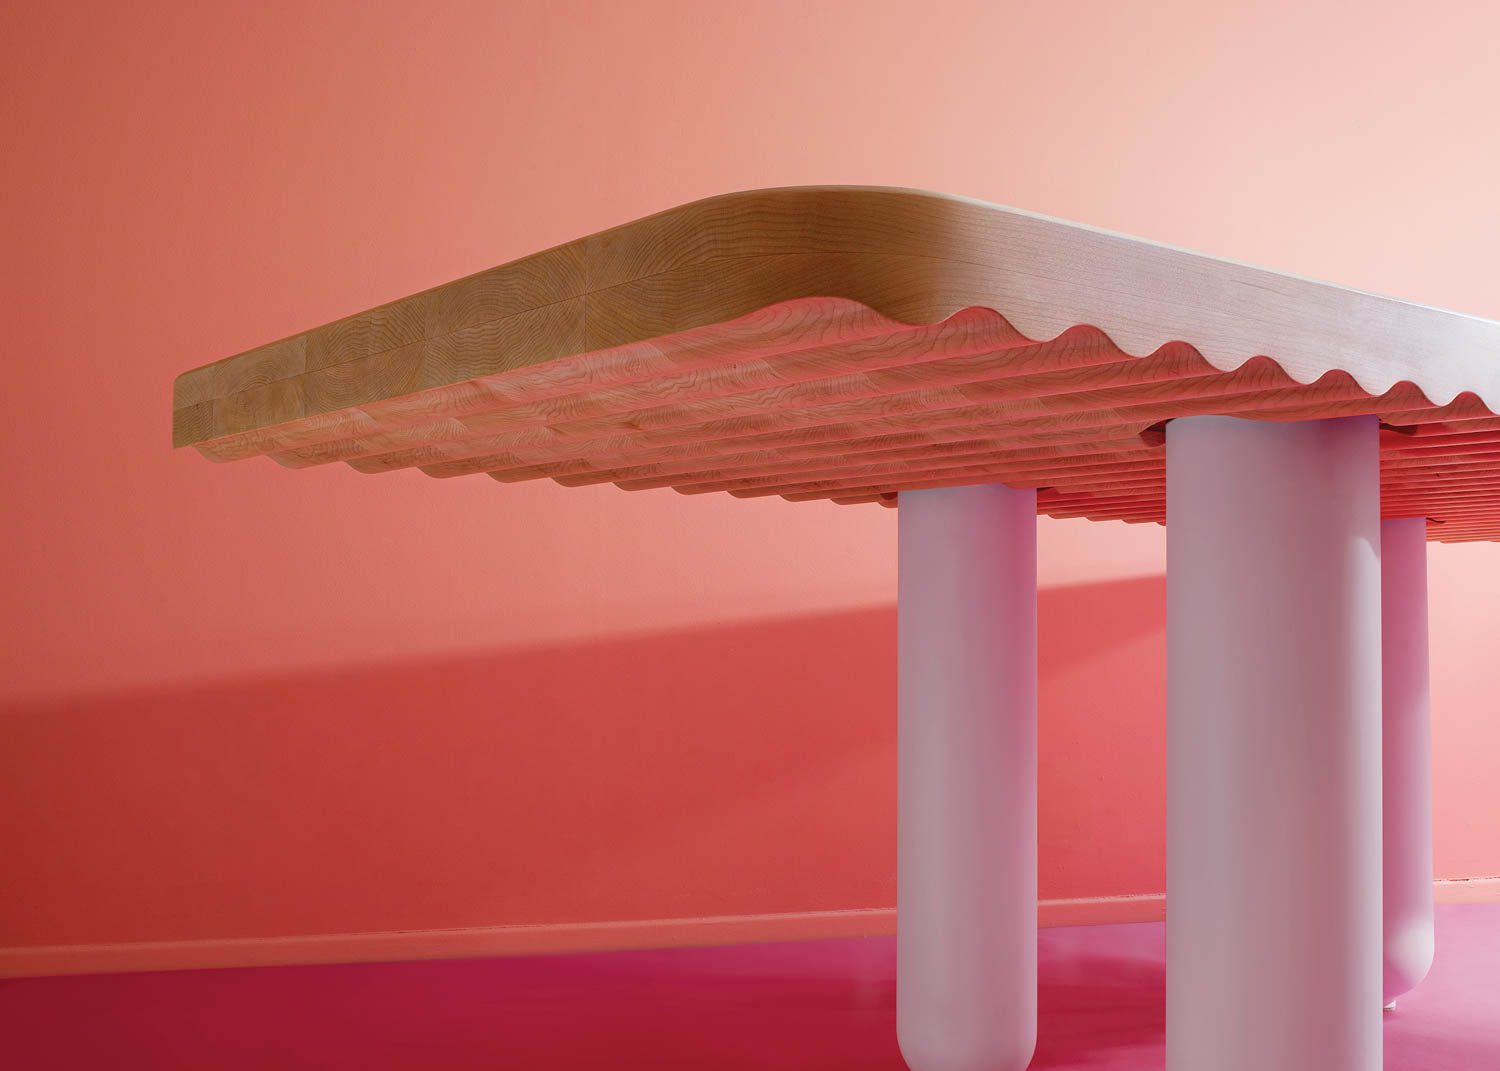 Naminami, a sculptural 96-inch-long dining table via a wavy underside and balloonlike, cylindrical painted legs